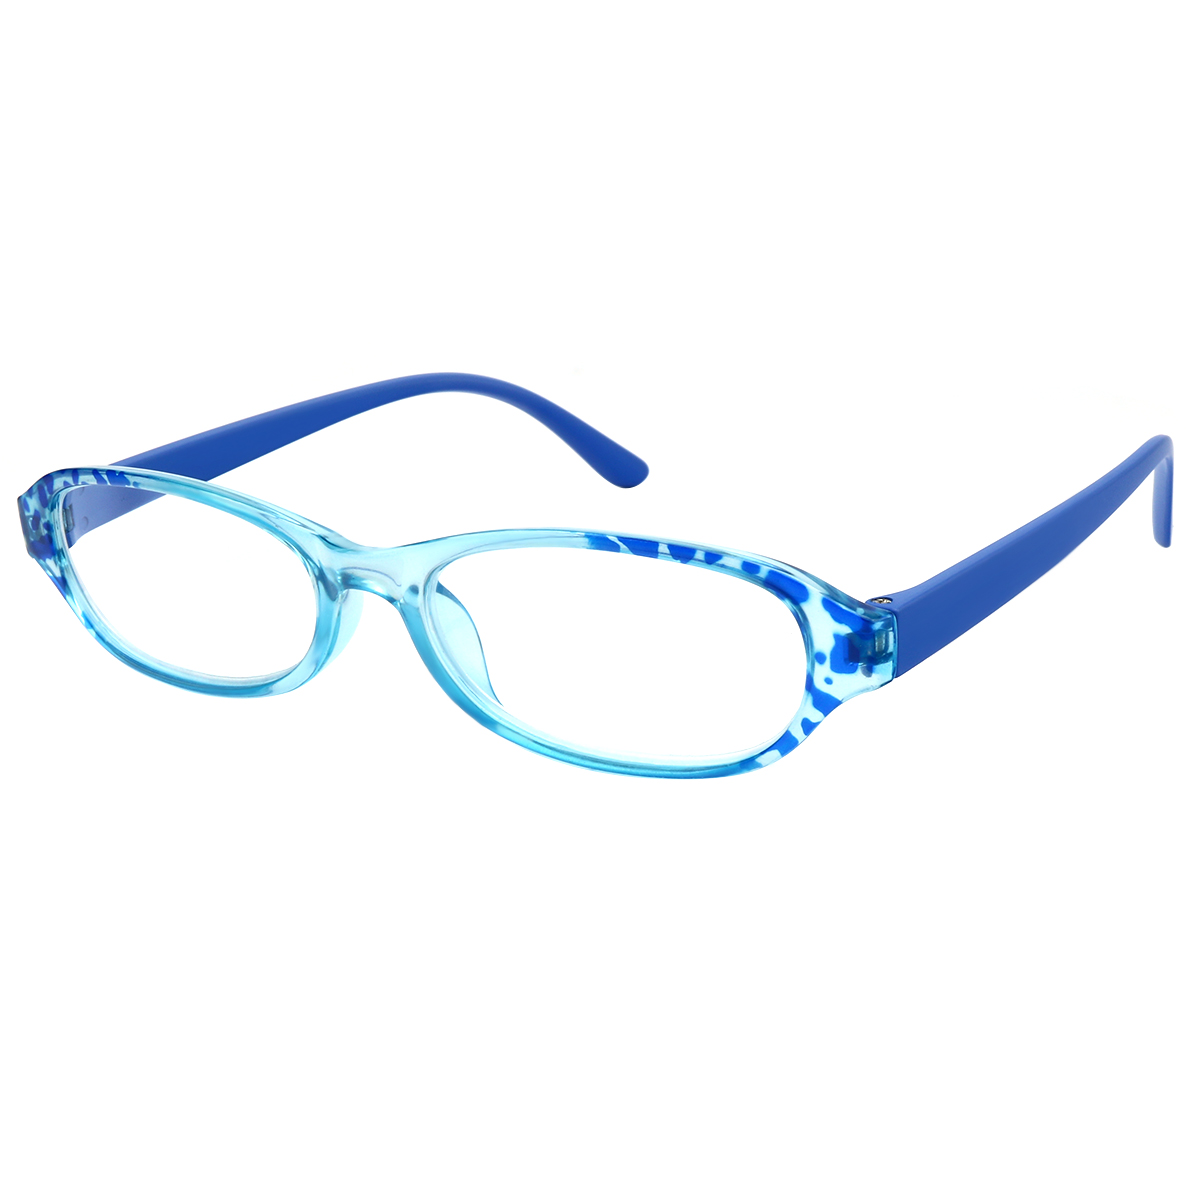 Palmetto - Oval Blue Reading Glasses for Women